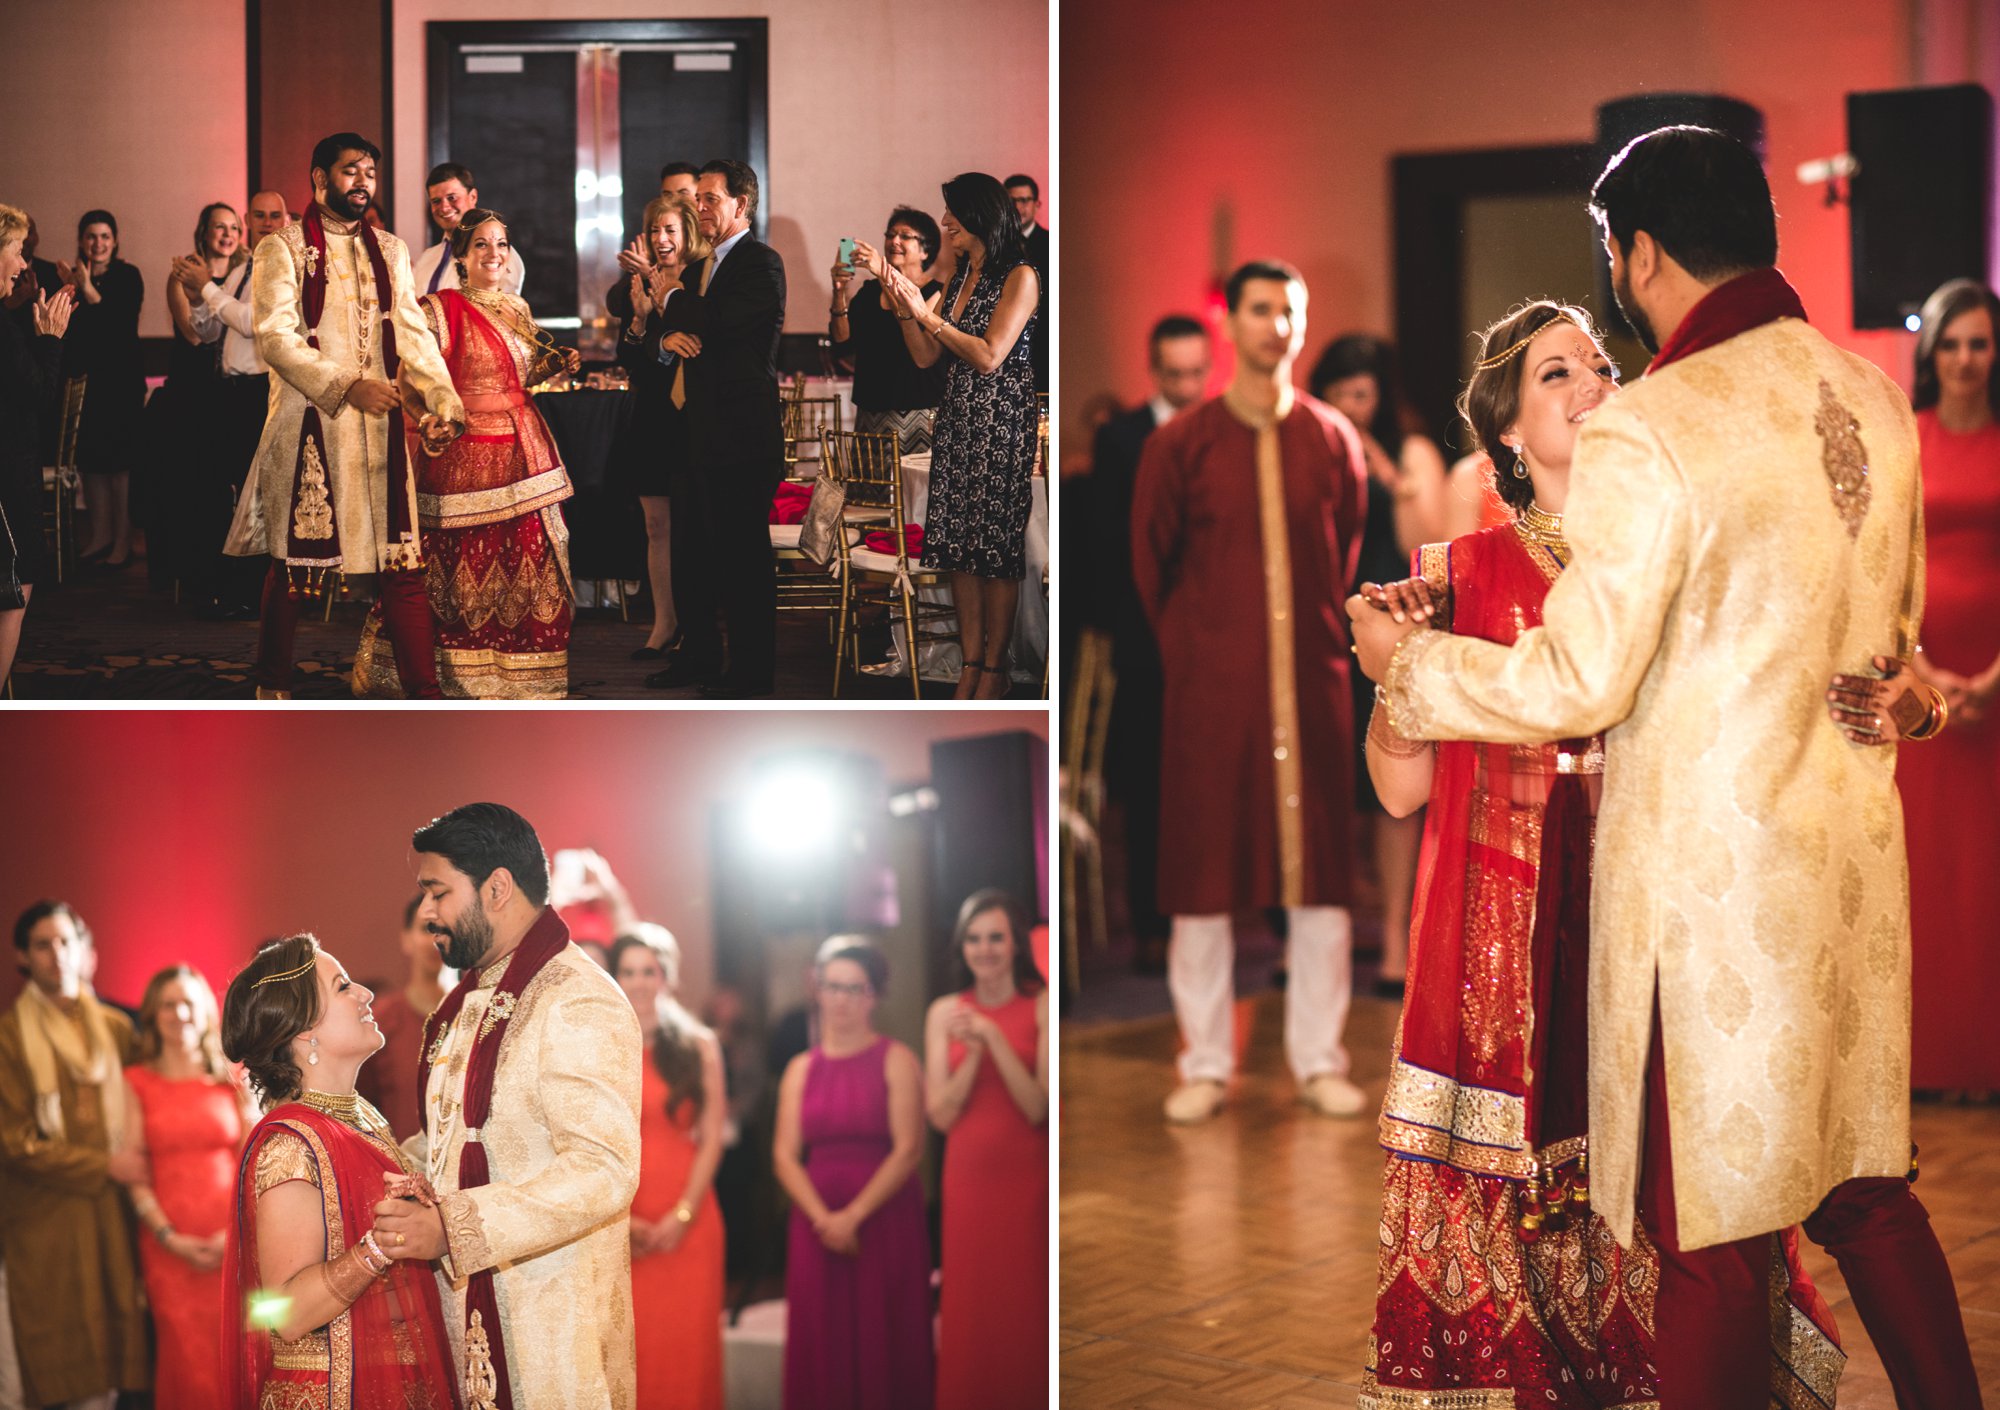 Washington DC colorful Indian wedding with a feminist bride. Dancing.